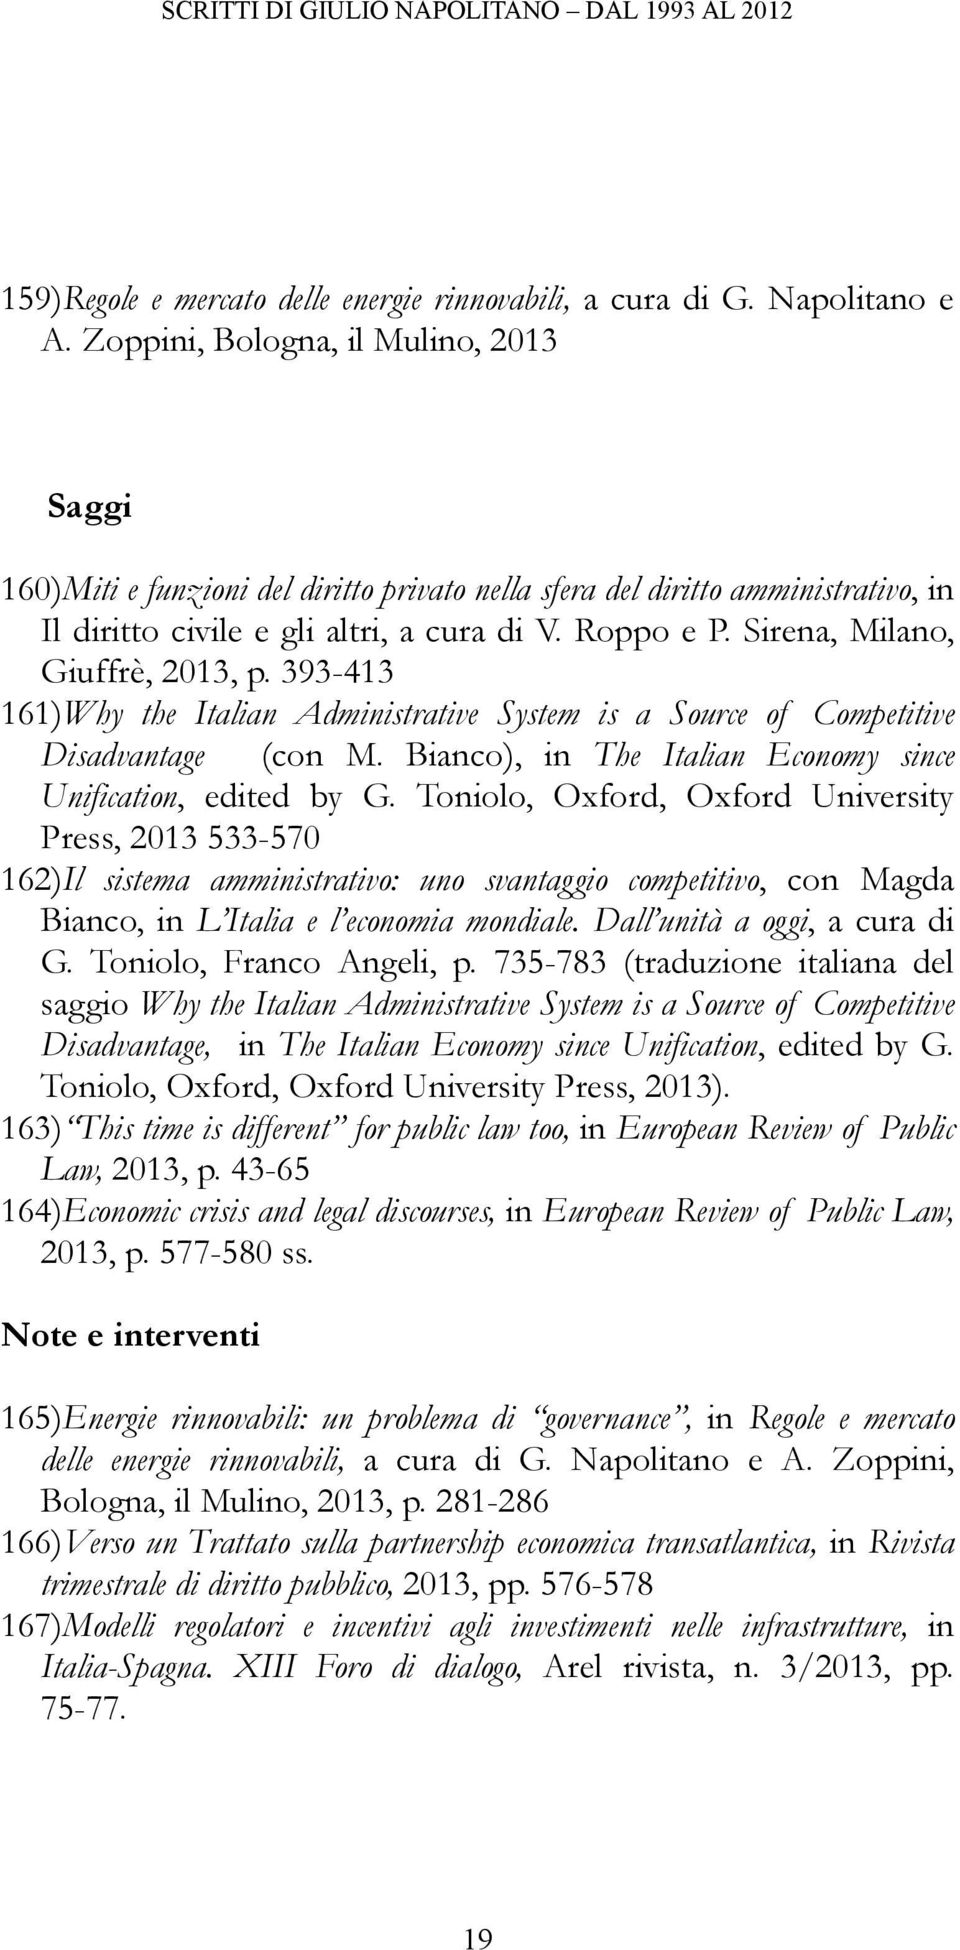 Sirena, Milano, Giuffrè, 2013, p. 393-413 161)Why the Italian Administrative System is a Source of Competitive Disadvantage (con M. Bianco), in The Italian Economy since Unification, edited by G.